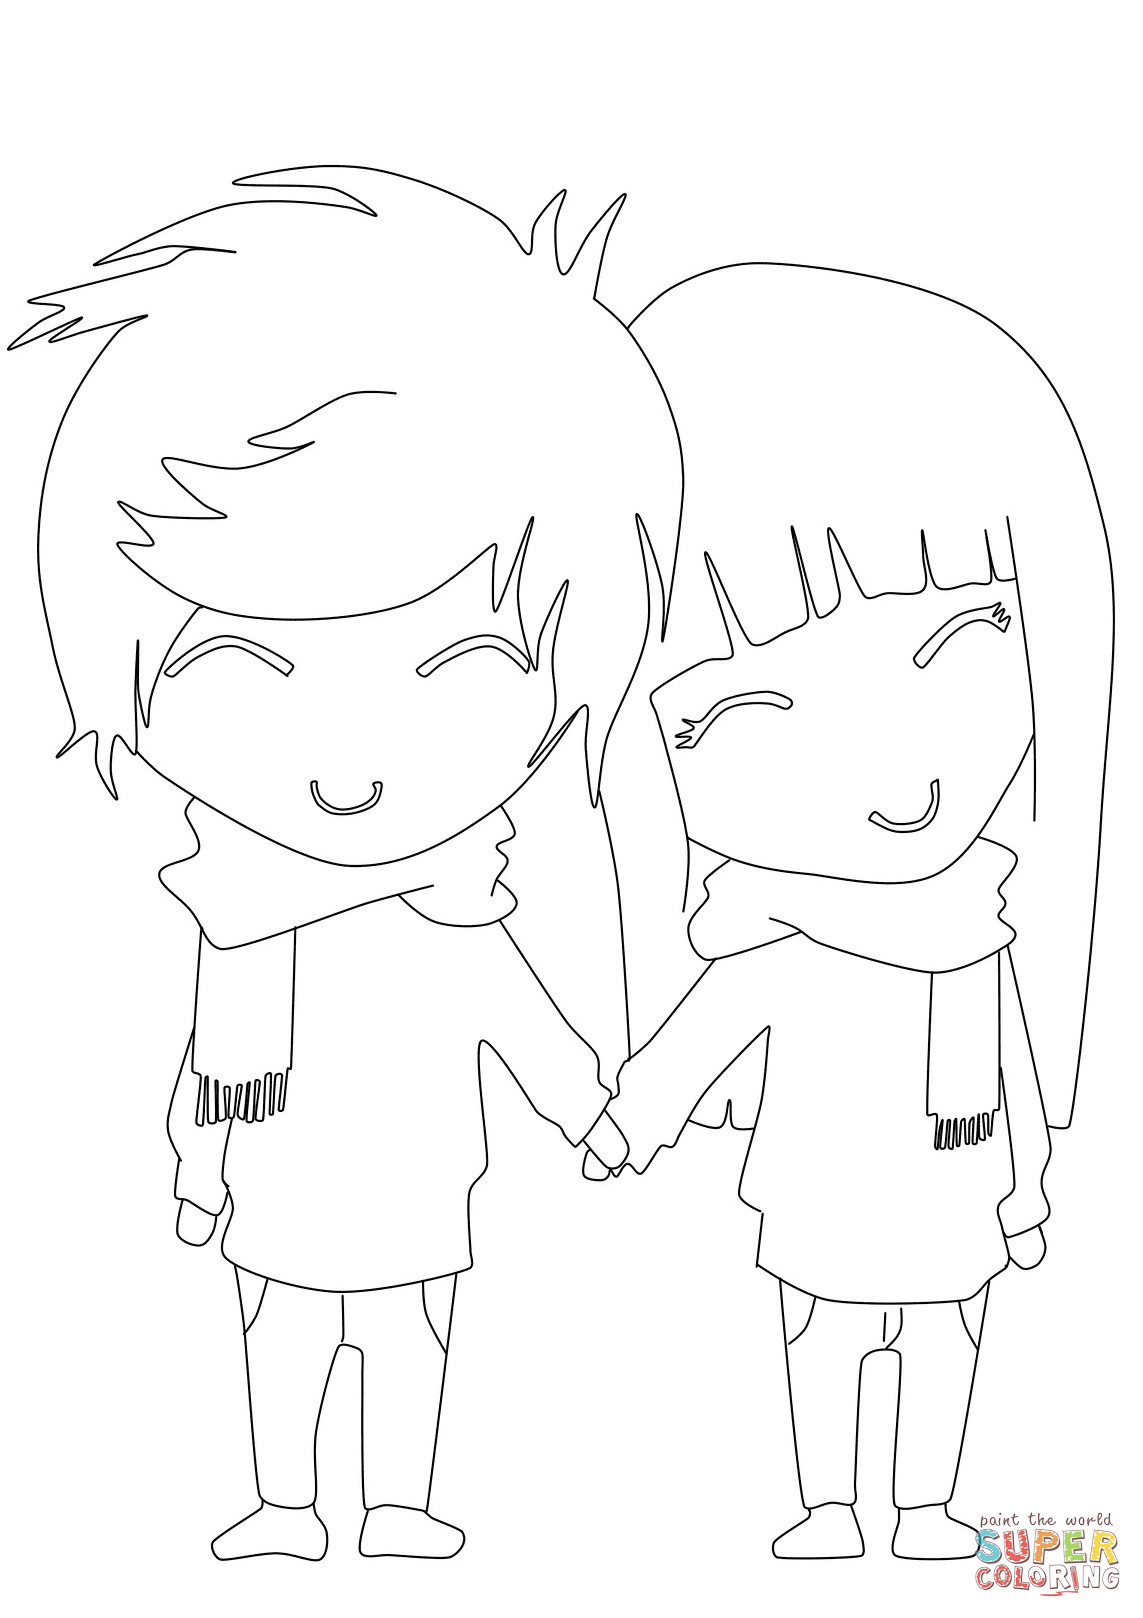 Coloring Pages For Girls And Boys
 Dibujo de Muchacho y muchacha del Anime para colorear